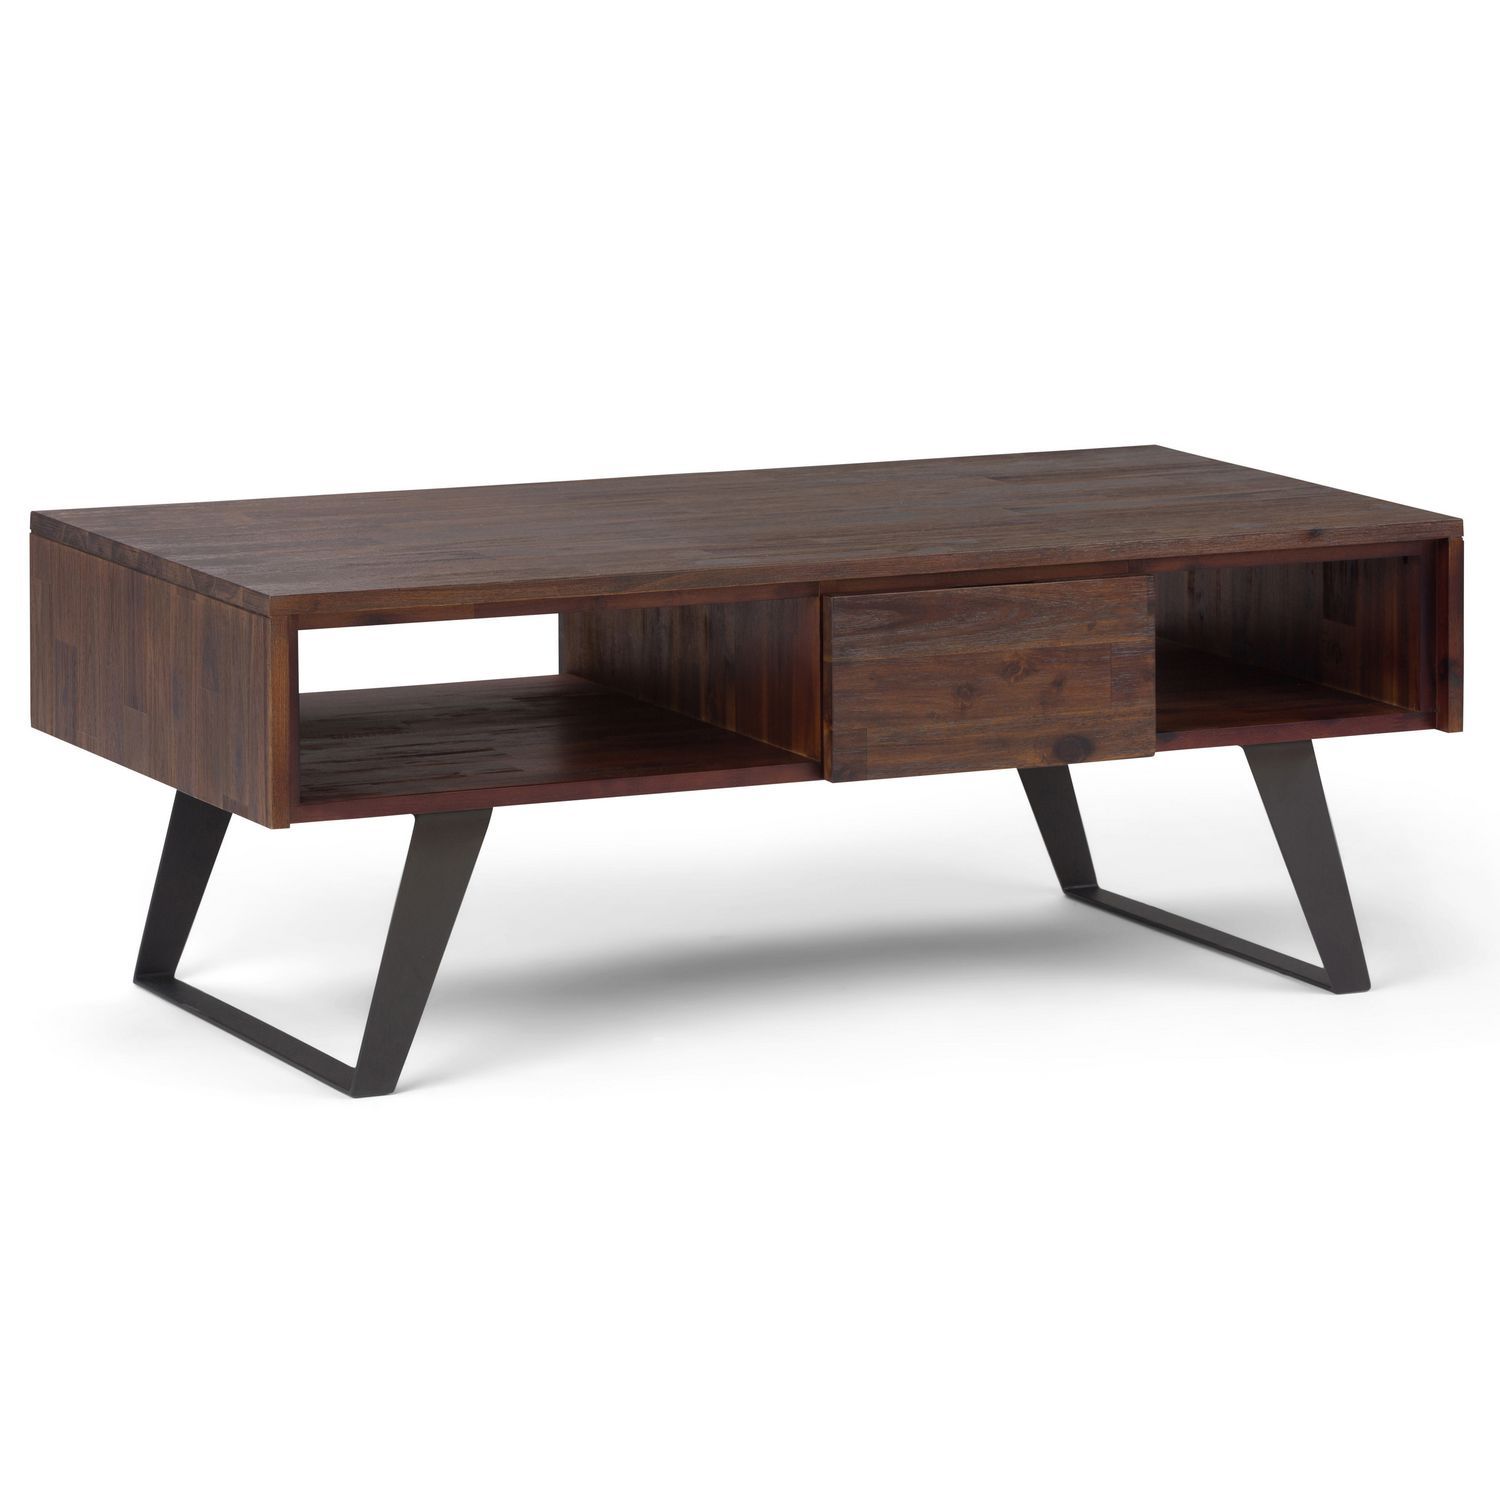 Wyndenhall Mitchell Solid Acacia Coffee Table In Distressed Charcoal With Distressed Brown Wood 2 Tier Desks (View 2 of 15)